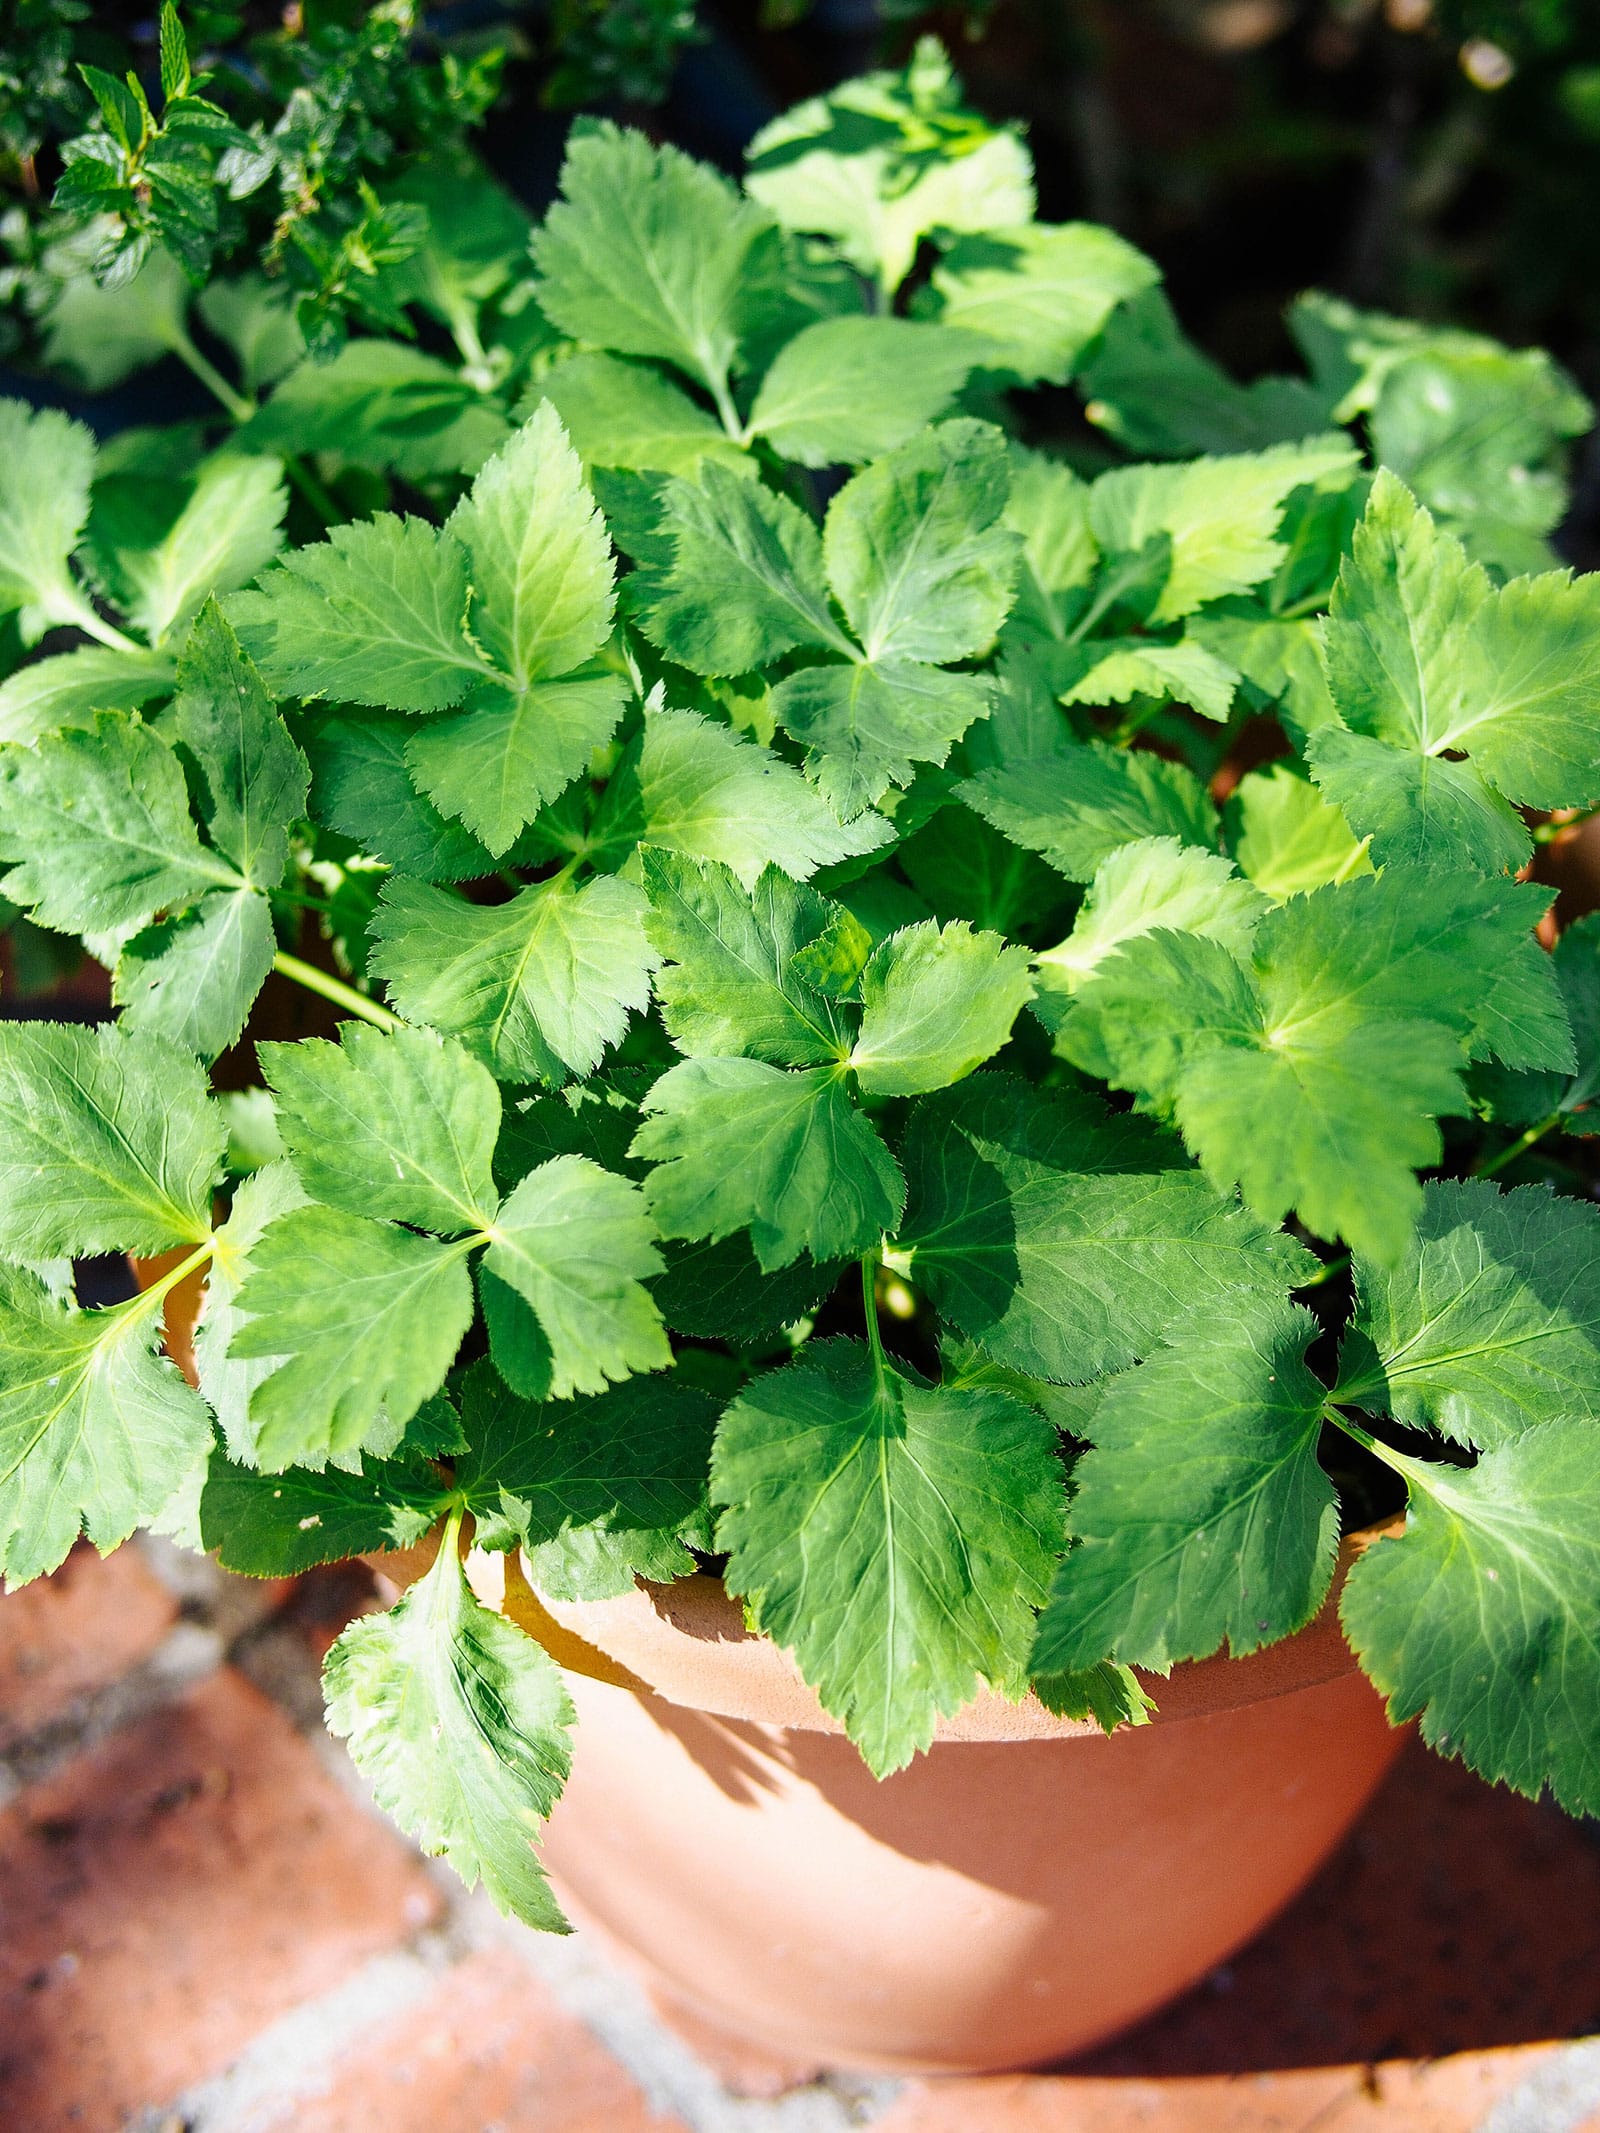 Perennial mitsuba (wild Japanese parsley) growing in a brown plastic pot